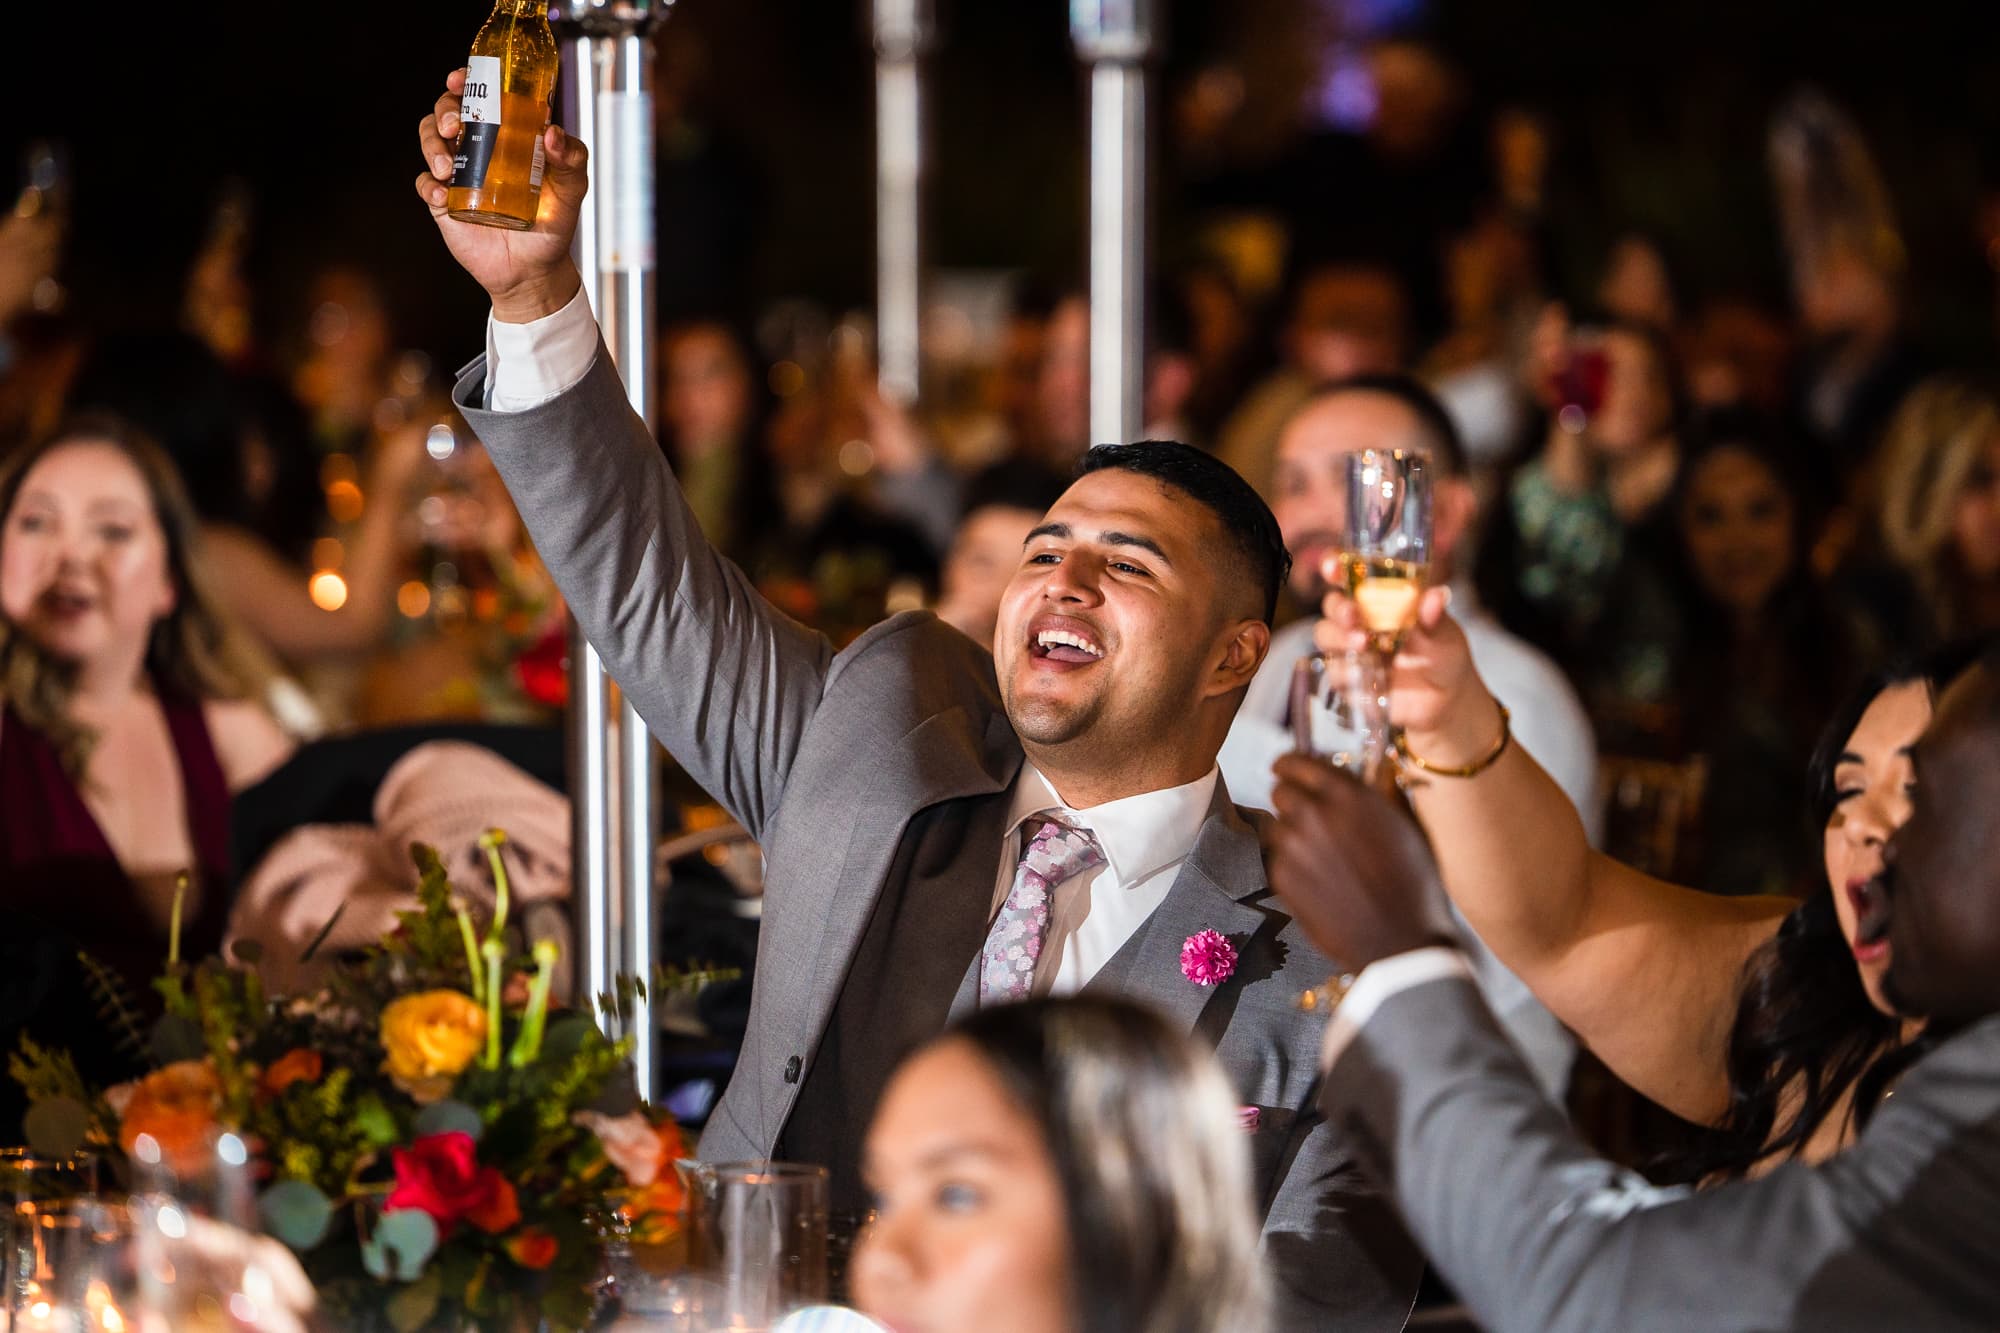 Wedding guests cheer and raise their glasses.